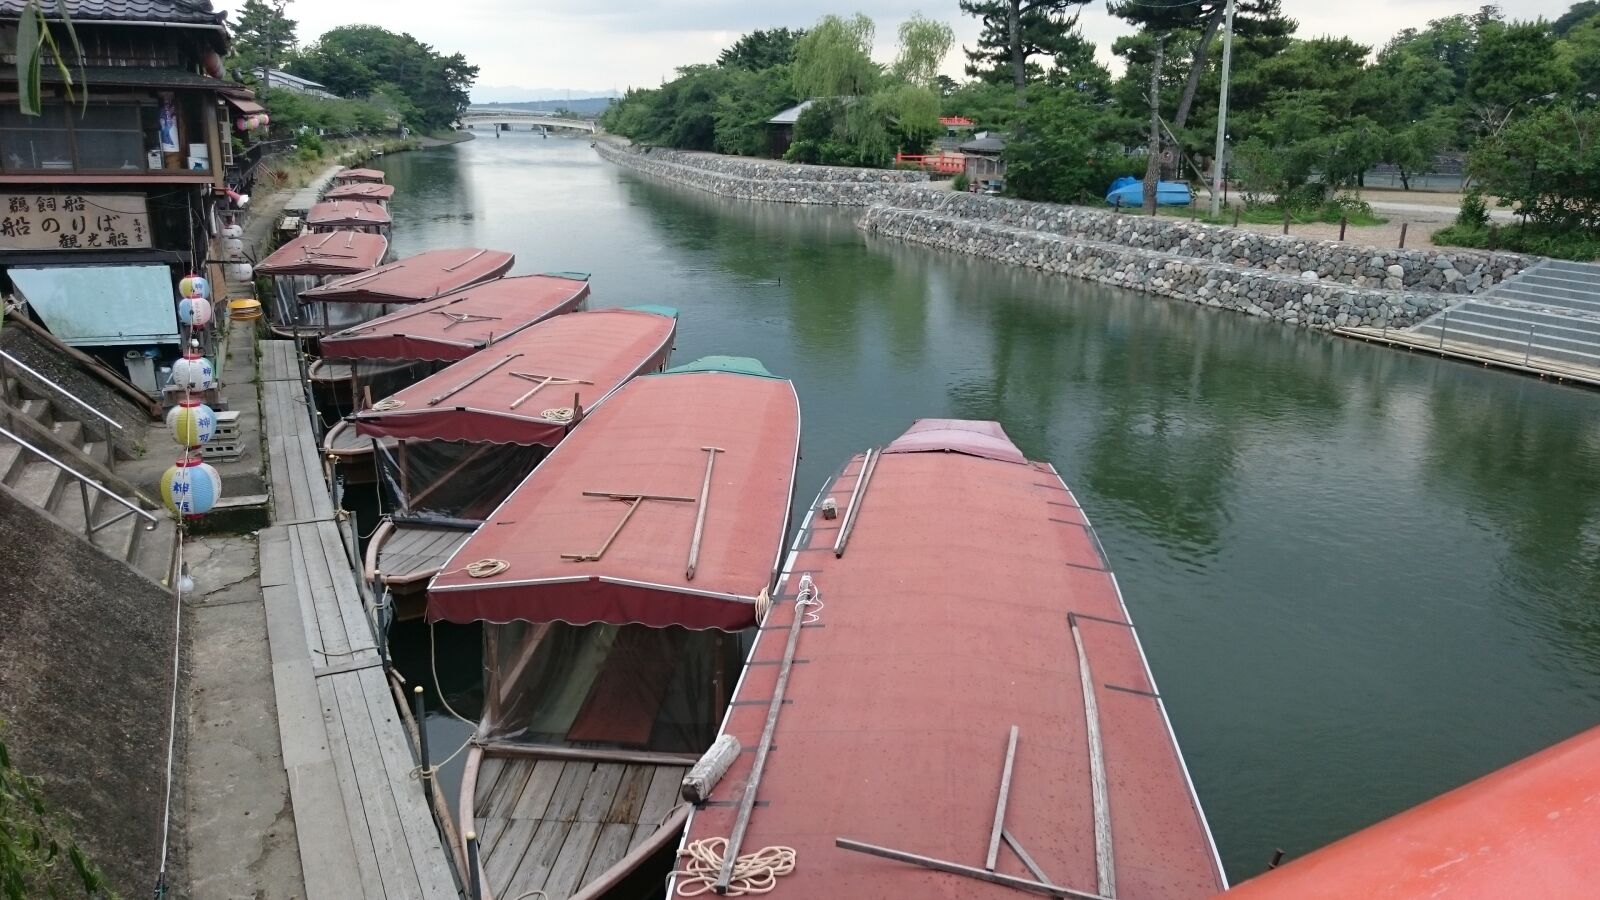 Sony Xperia Z3 sample photo. Boat, cannel, japan photography